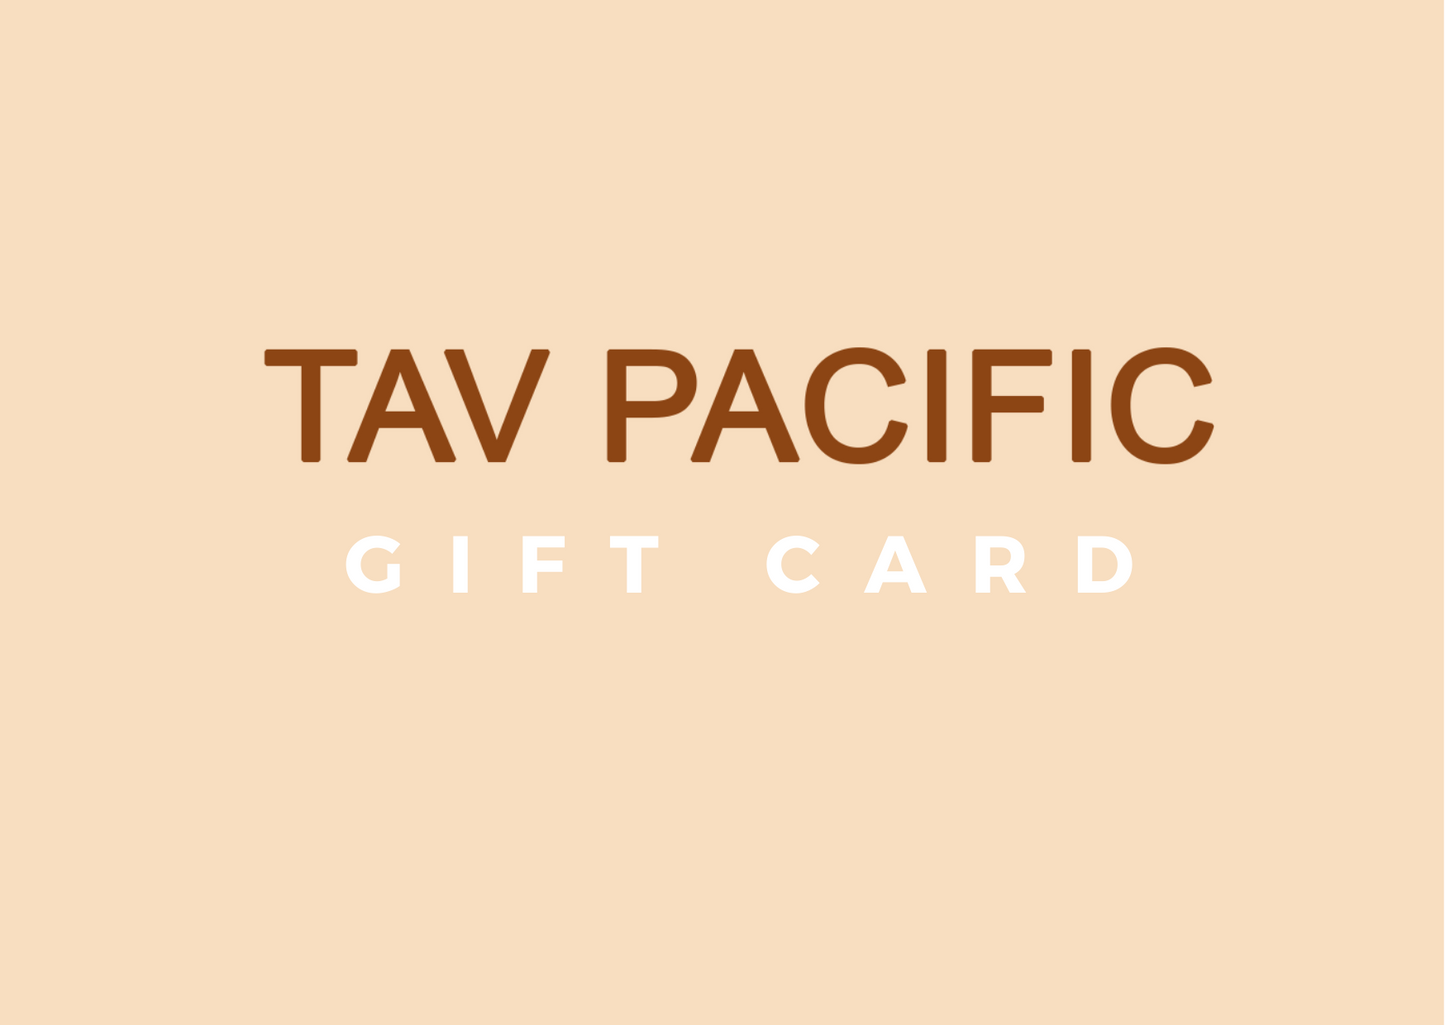 Gift Card - Online Only